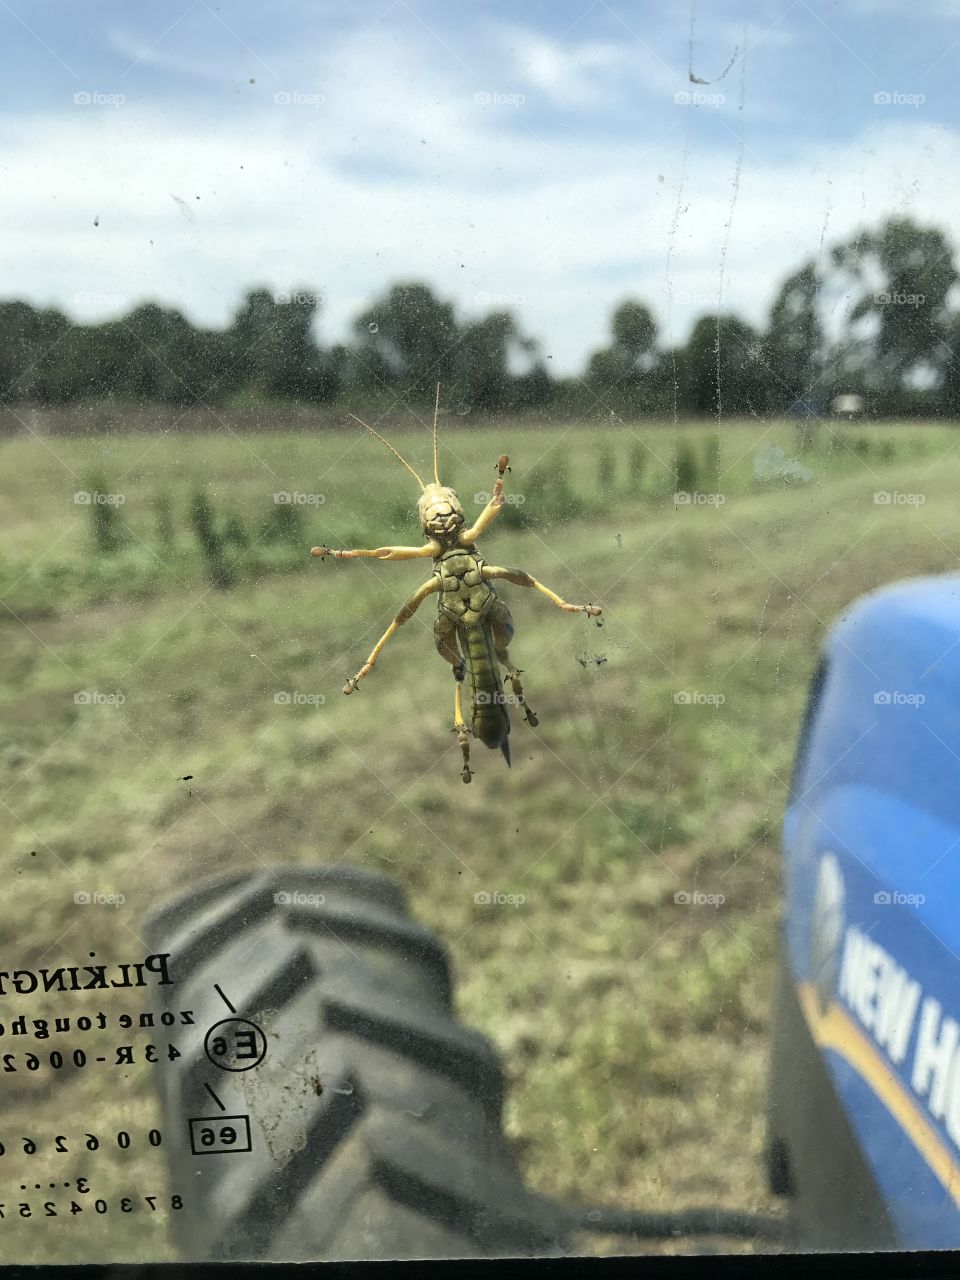 While farming in the south, we had a hitchhiker! Vibrant grasshopper on the windshield of a blue tractor with field and trees in the distance.